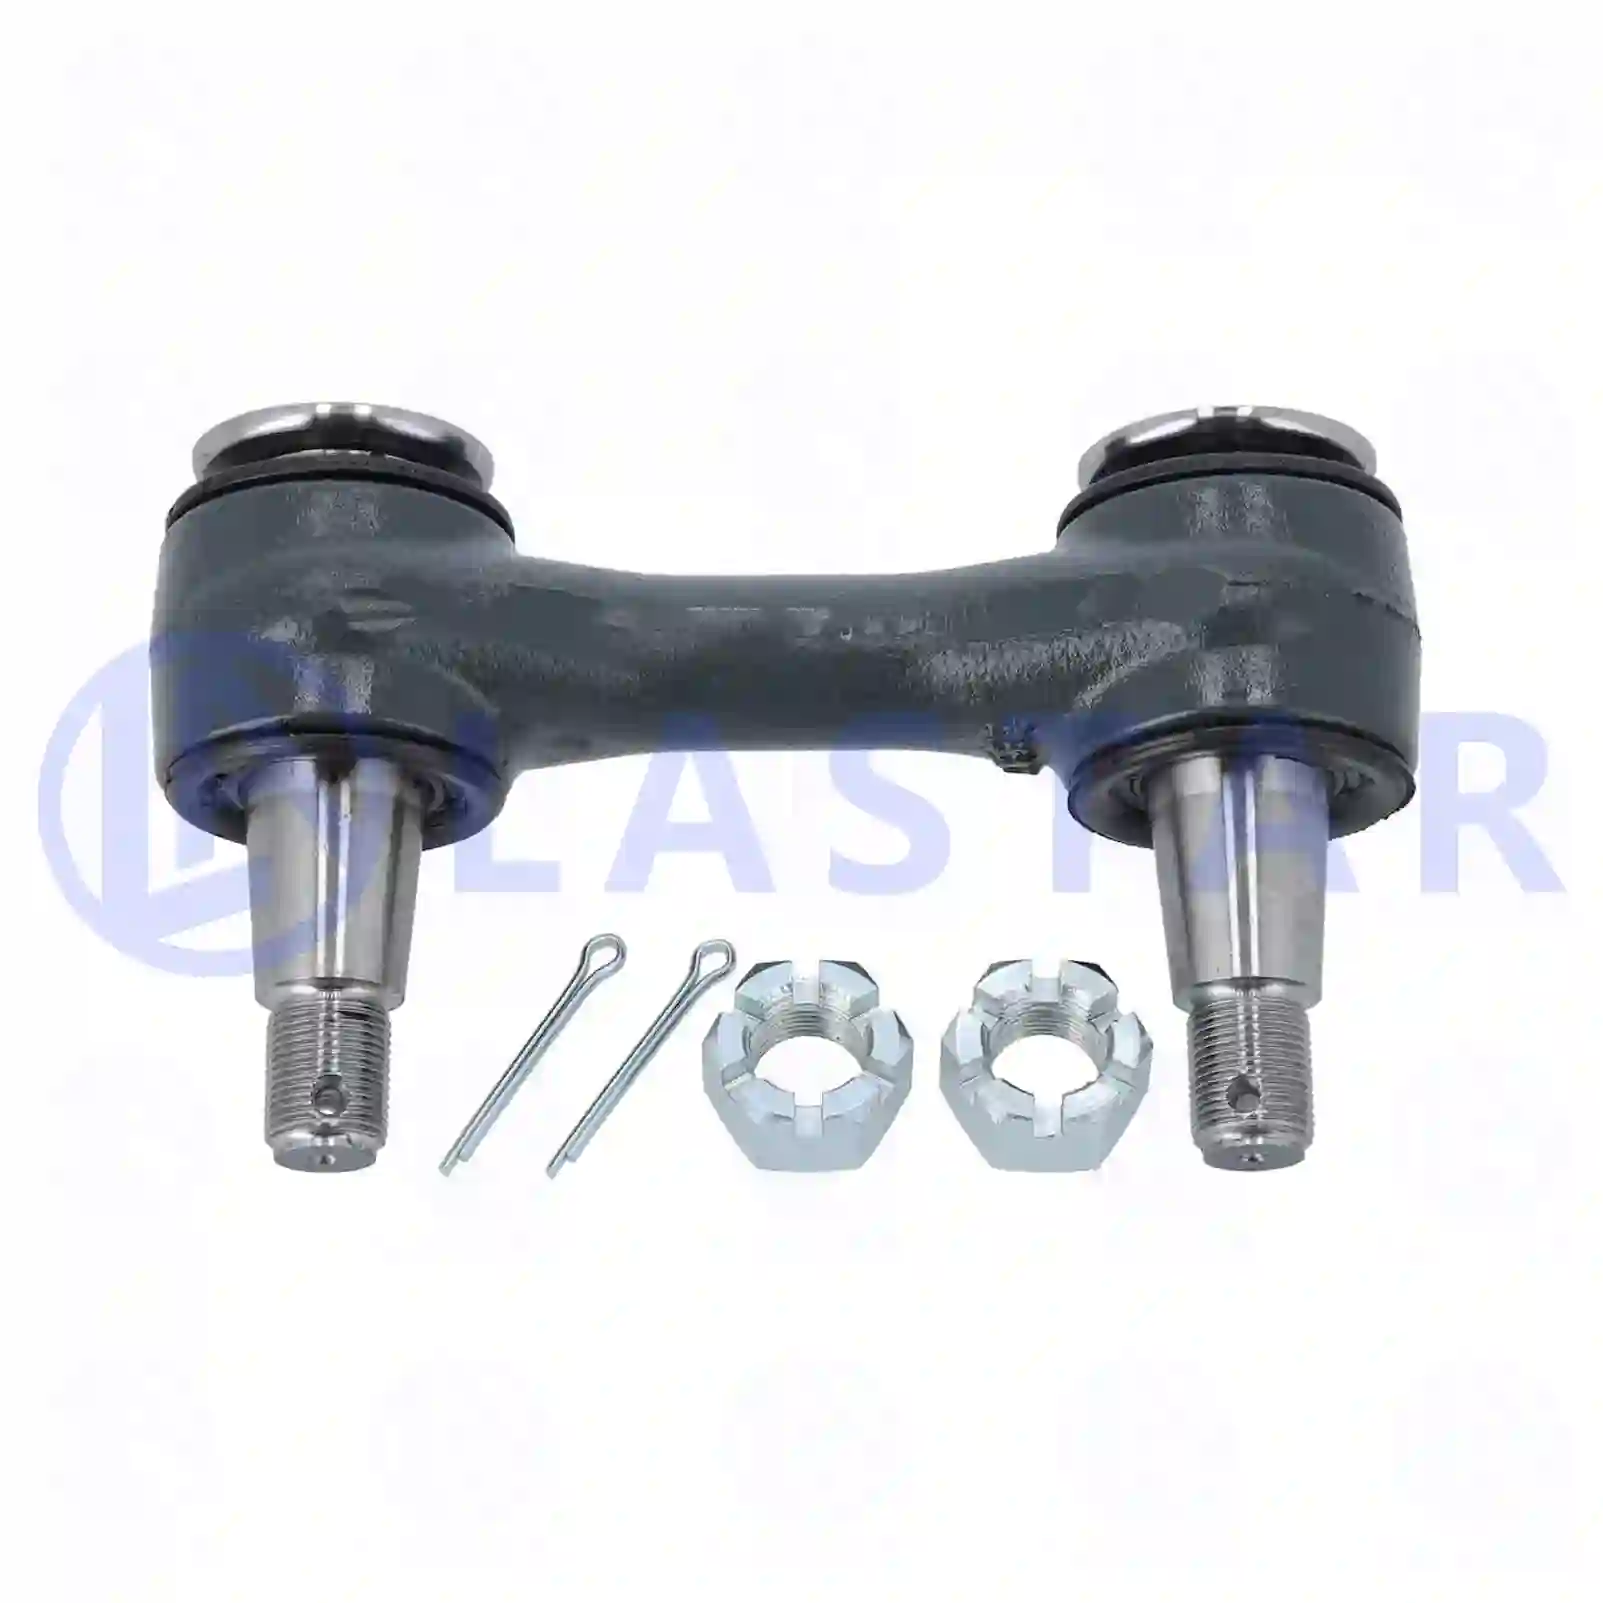 Stabilizer stay, 77727021, 21952221, , ||  77727021 Lastar Spare Part | Truck Spare Parts, Auotomotive Spare Parts Stabilizer stay, 77727021, 21952221, , ||  77727021 Lastar Spare Part | Truck Spare Parts, Auotomotive Spare Parts